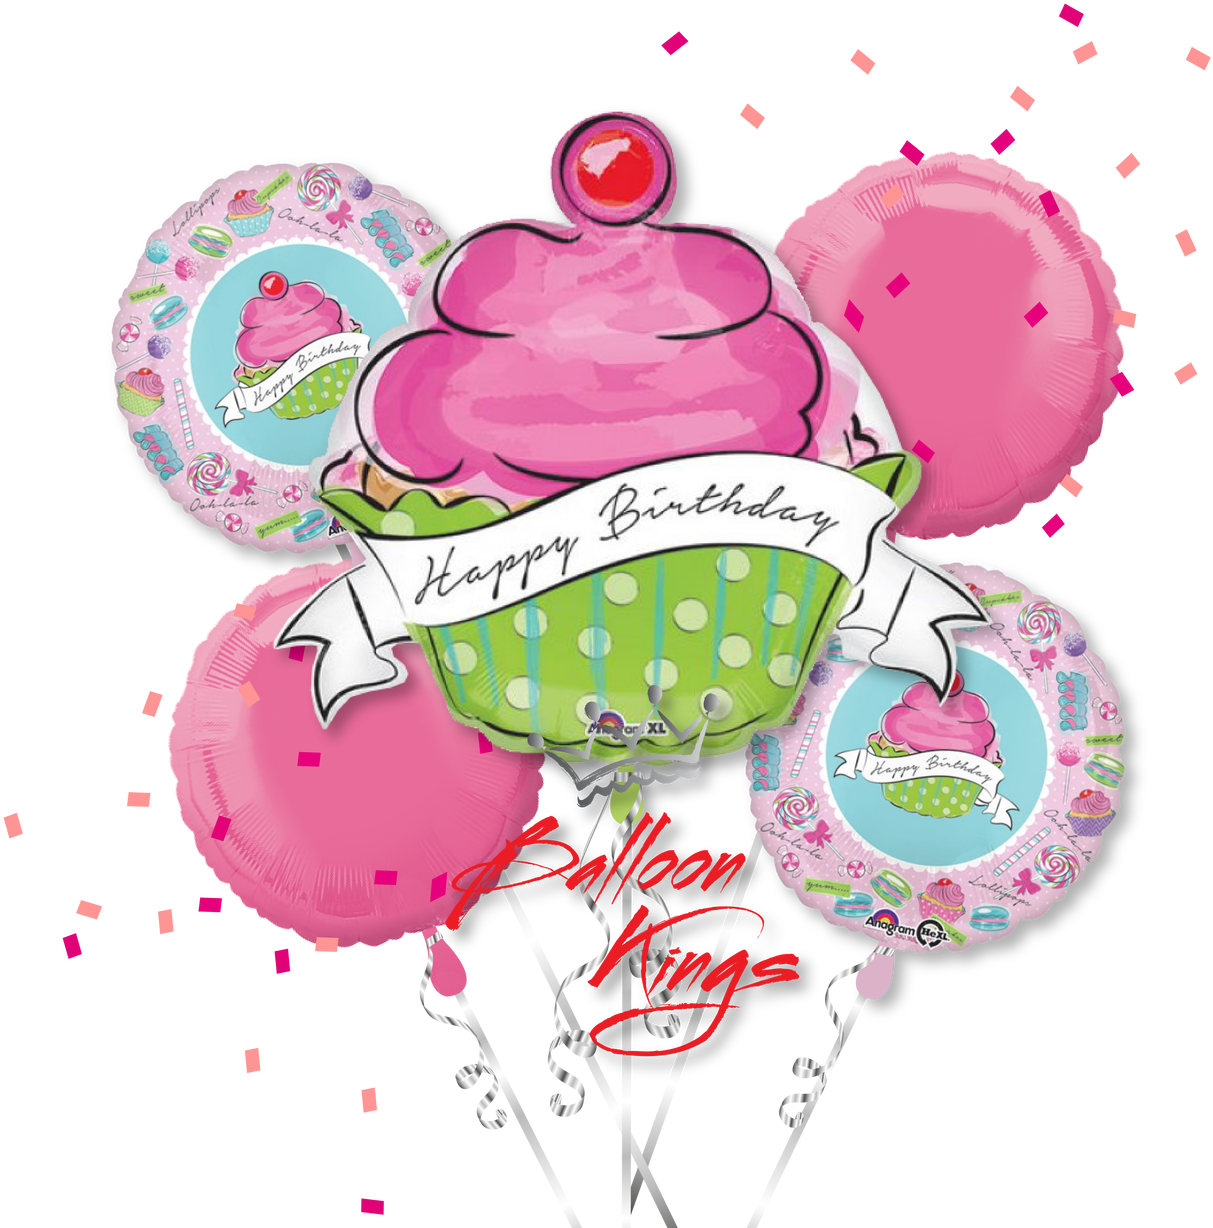 Cupcake Happy Birthday Bouquet - Bouquet Birthday Sweets Balloon Packaged - Mylar Balloons (1280x1280)